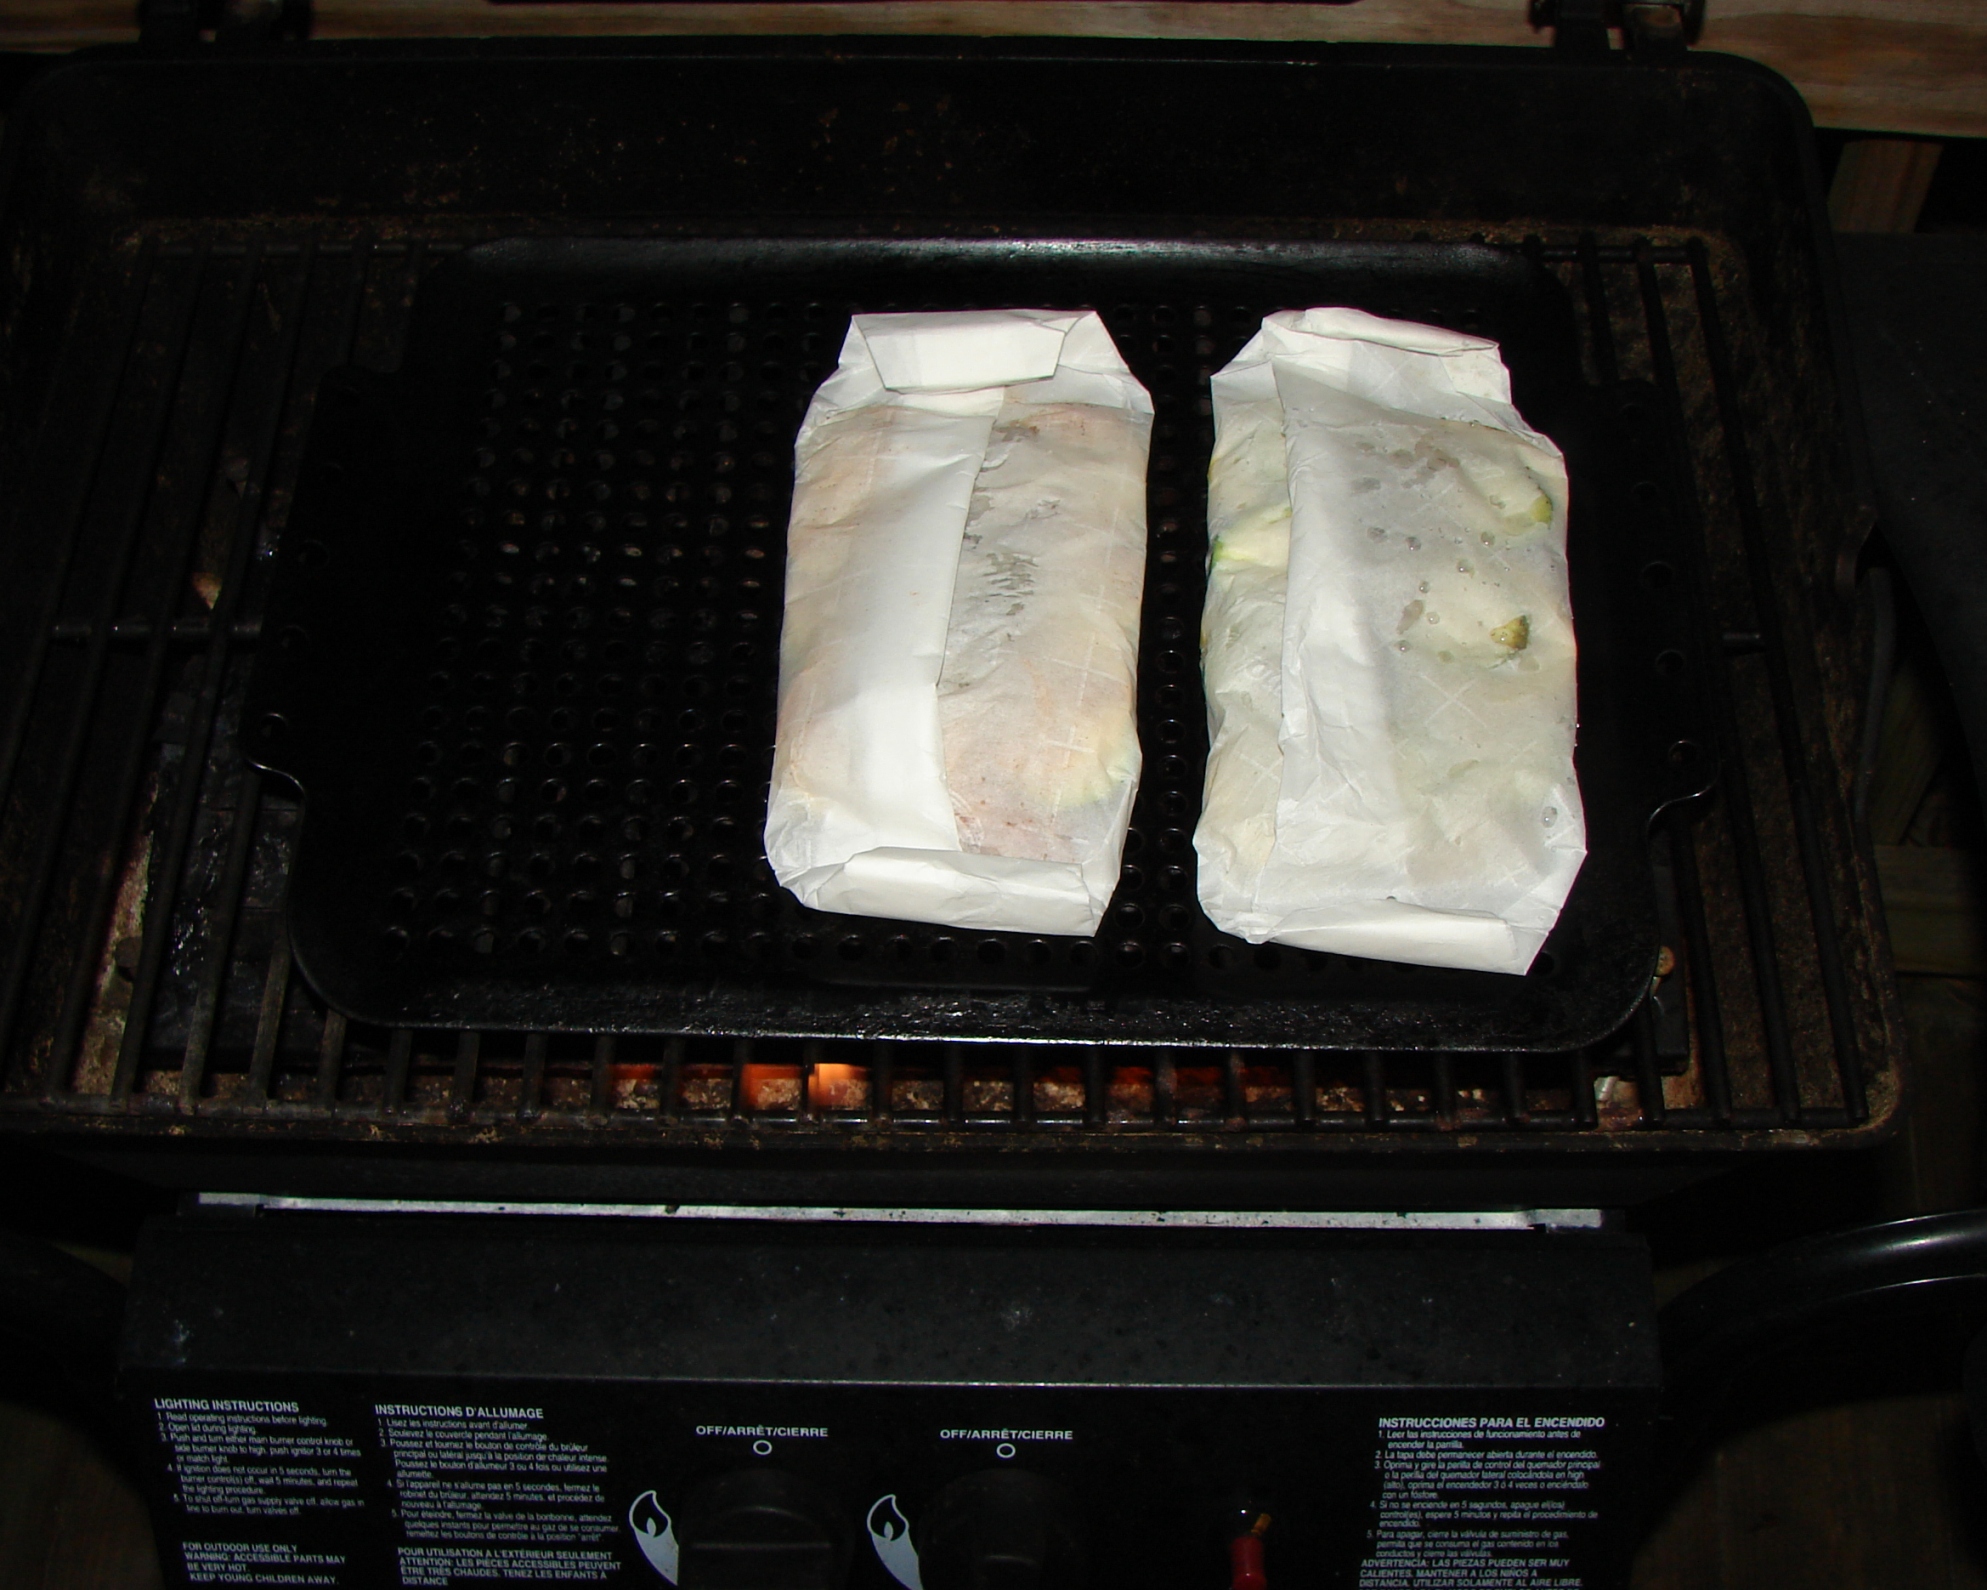  People use parchment paper for grill